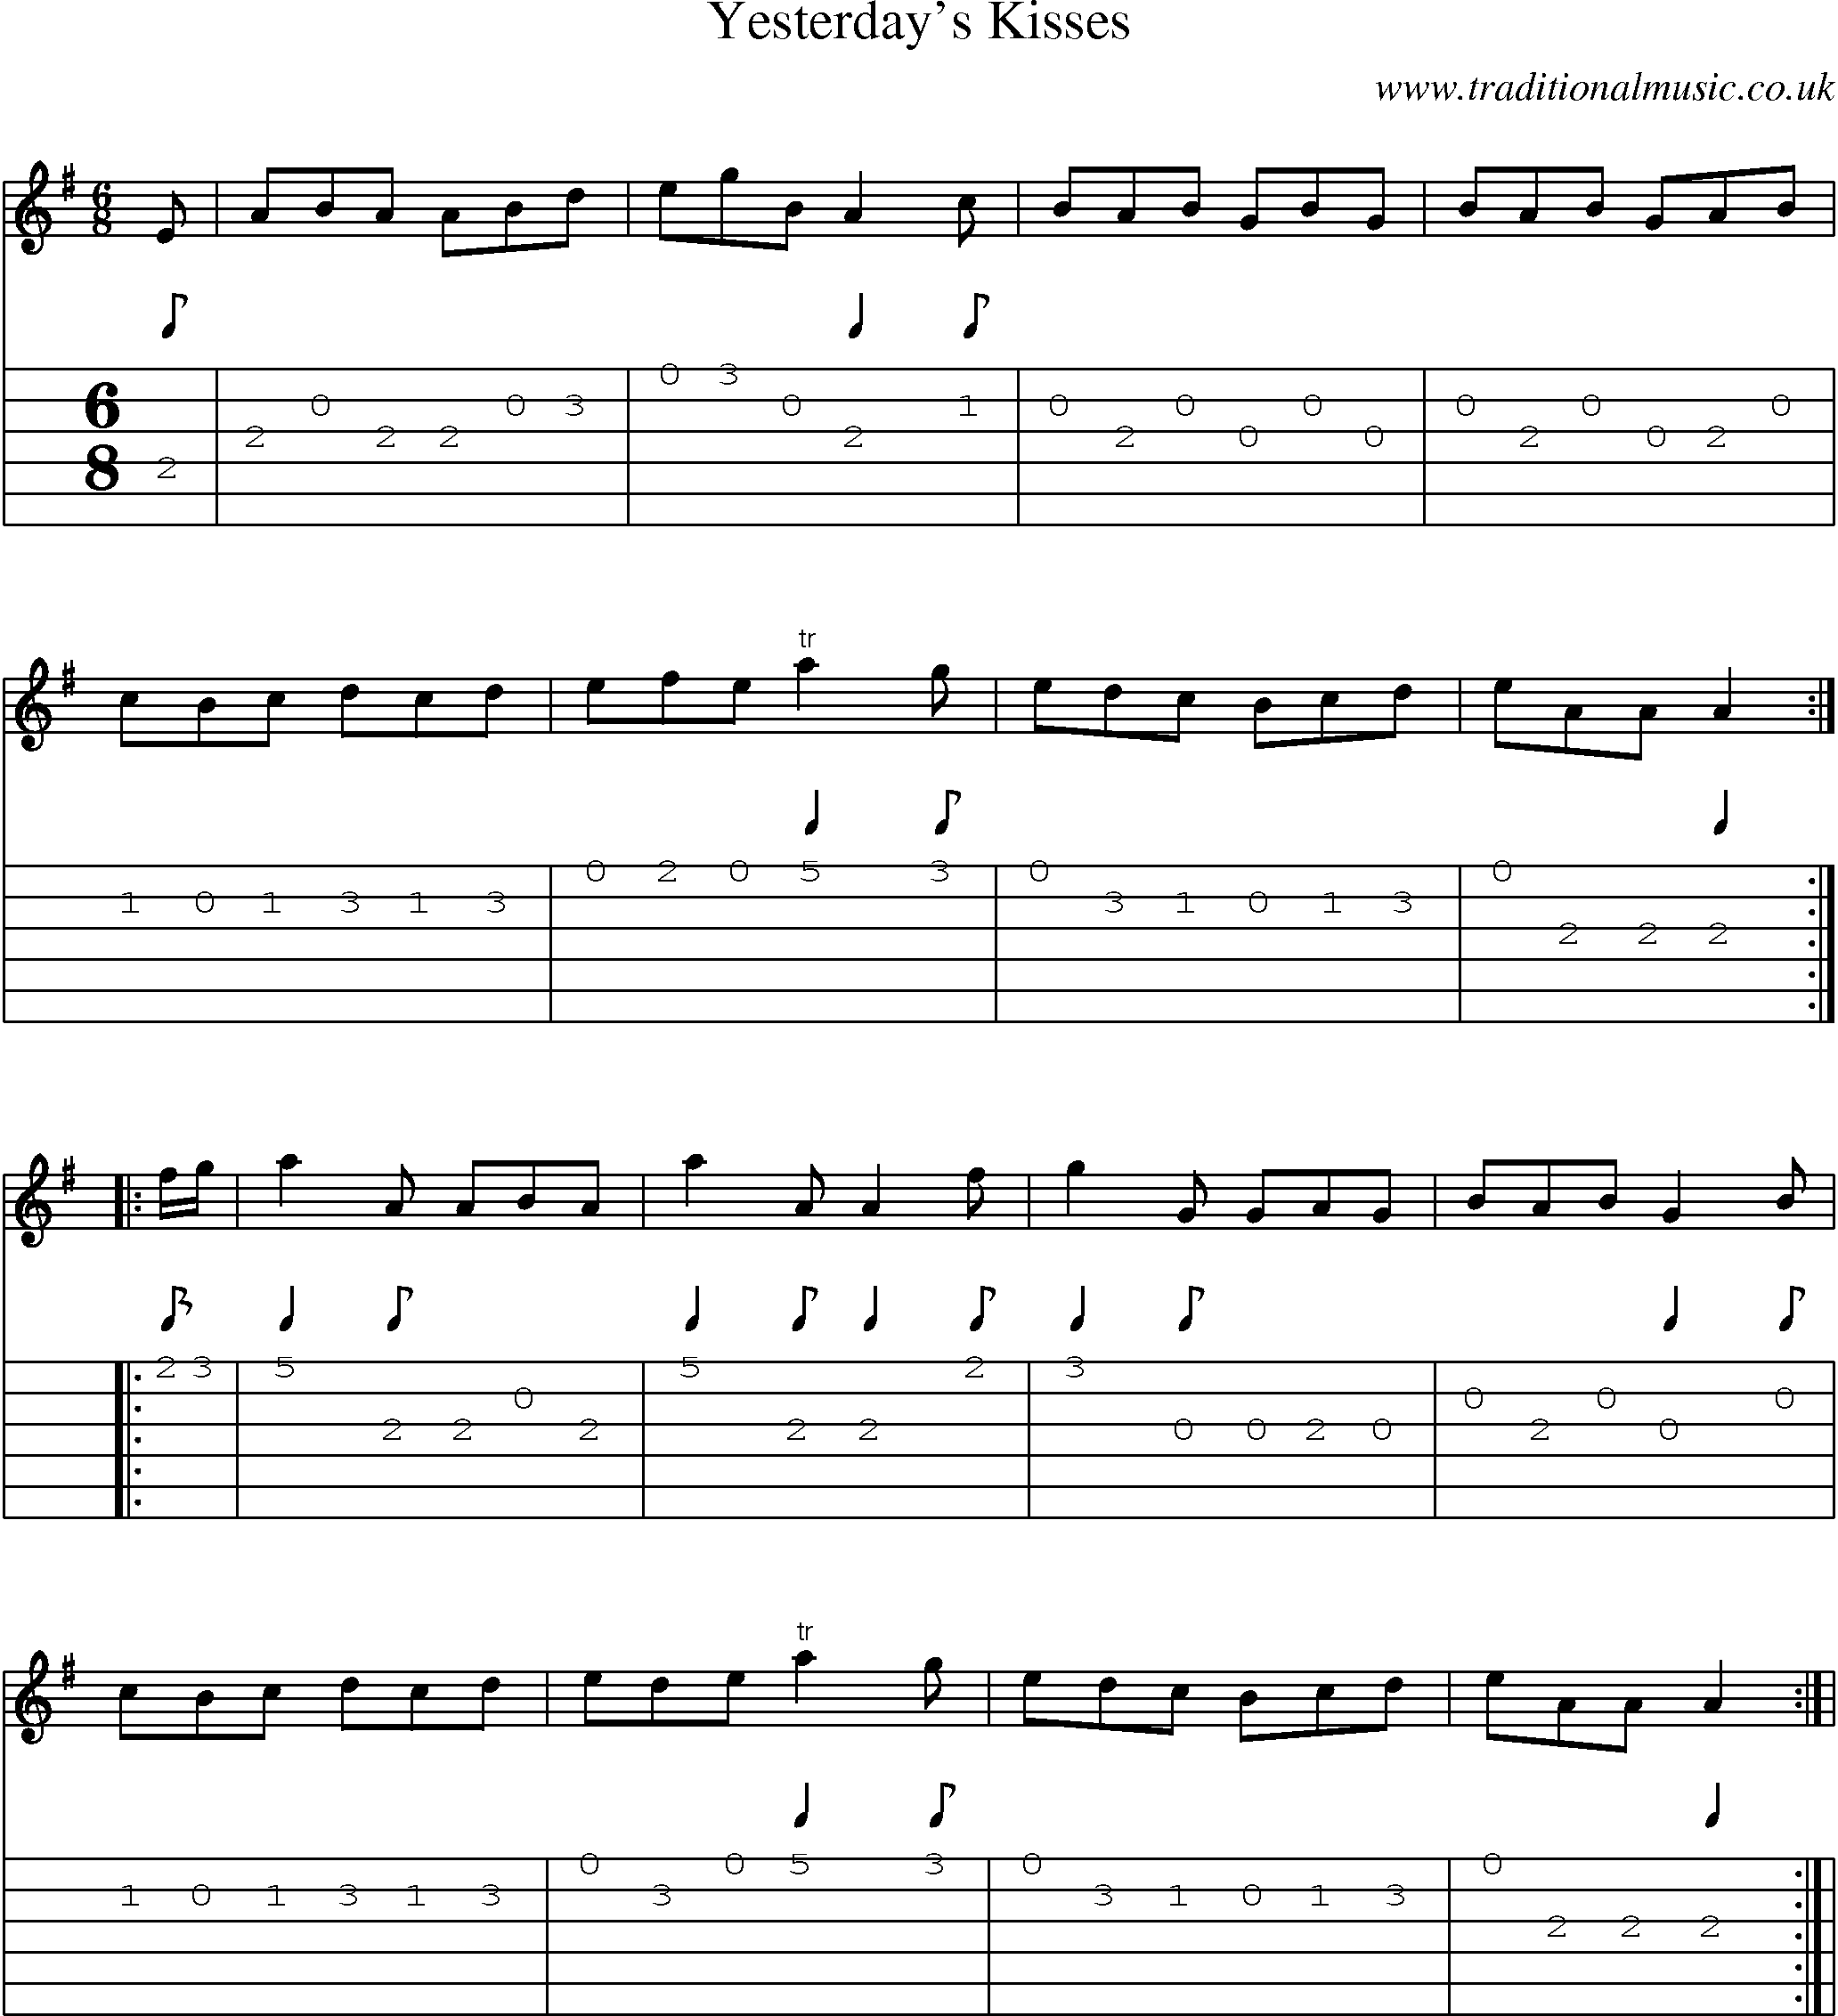 Music Score and Guitar Tabs for Yesterdays Kisses